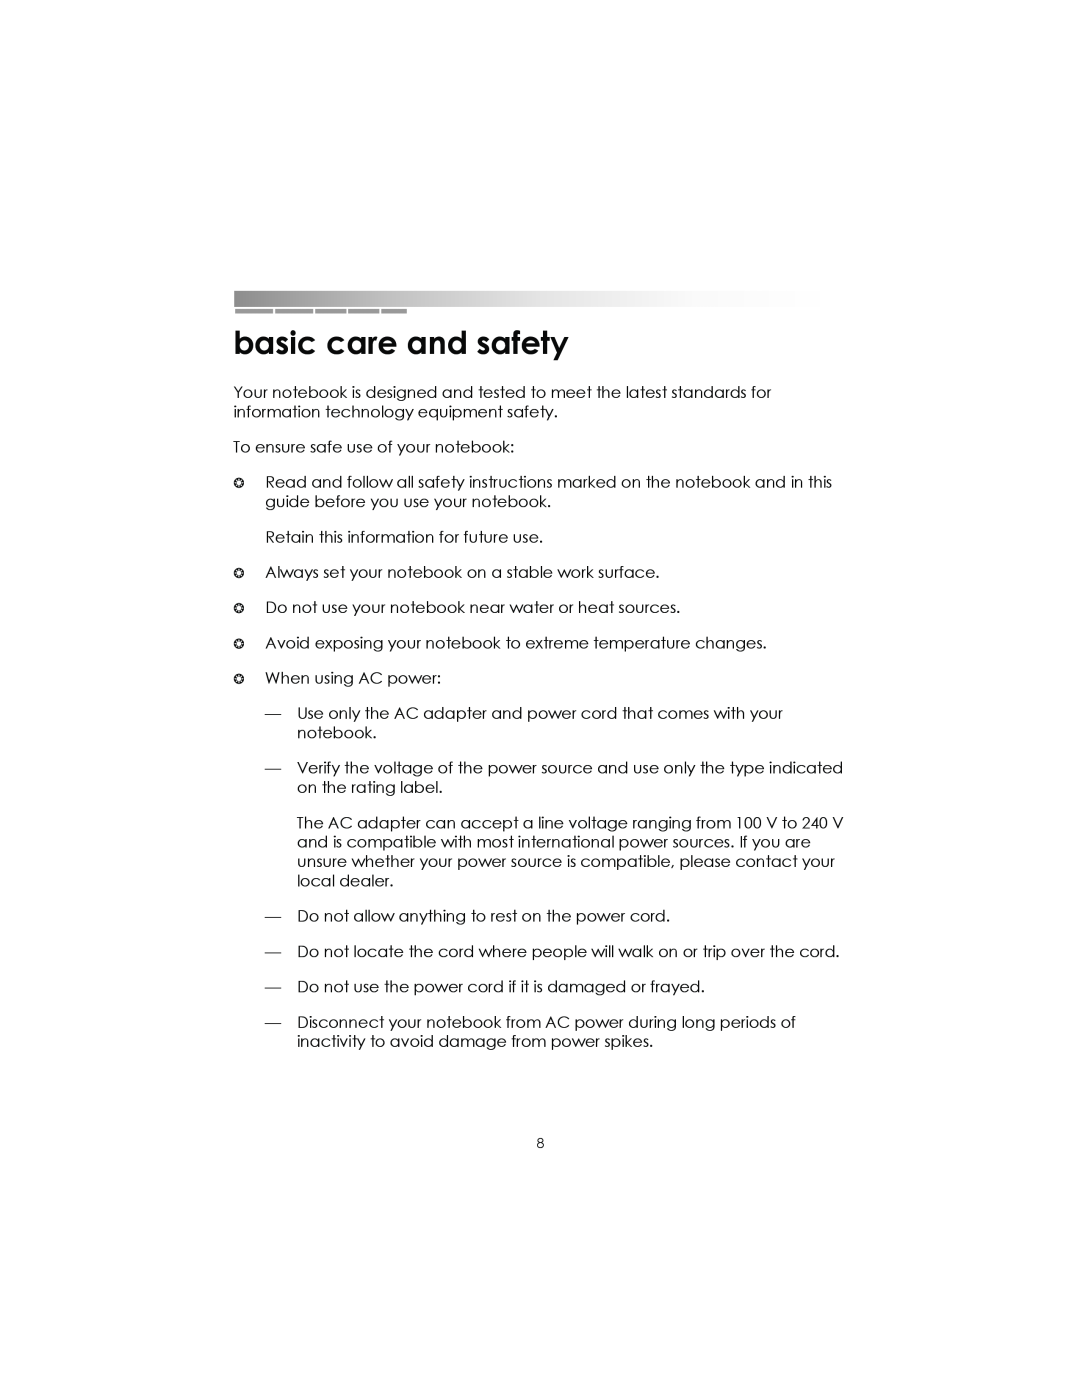 eMachines AAFW53700001K0 manual basic care and safety 